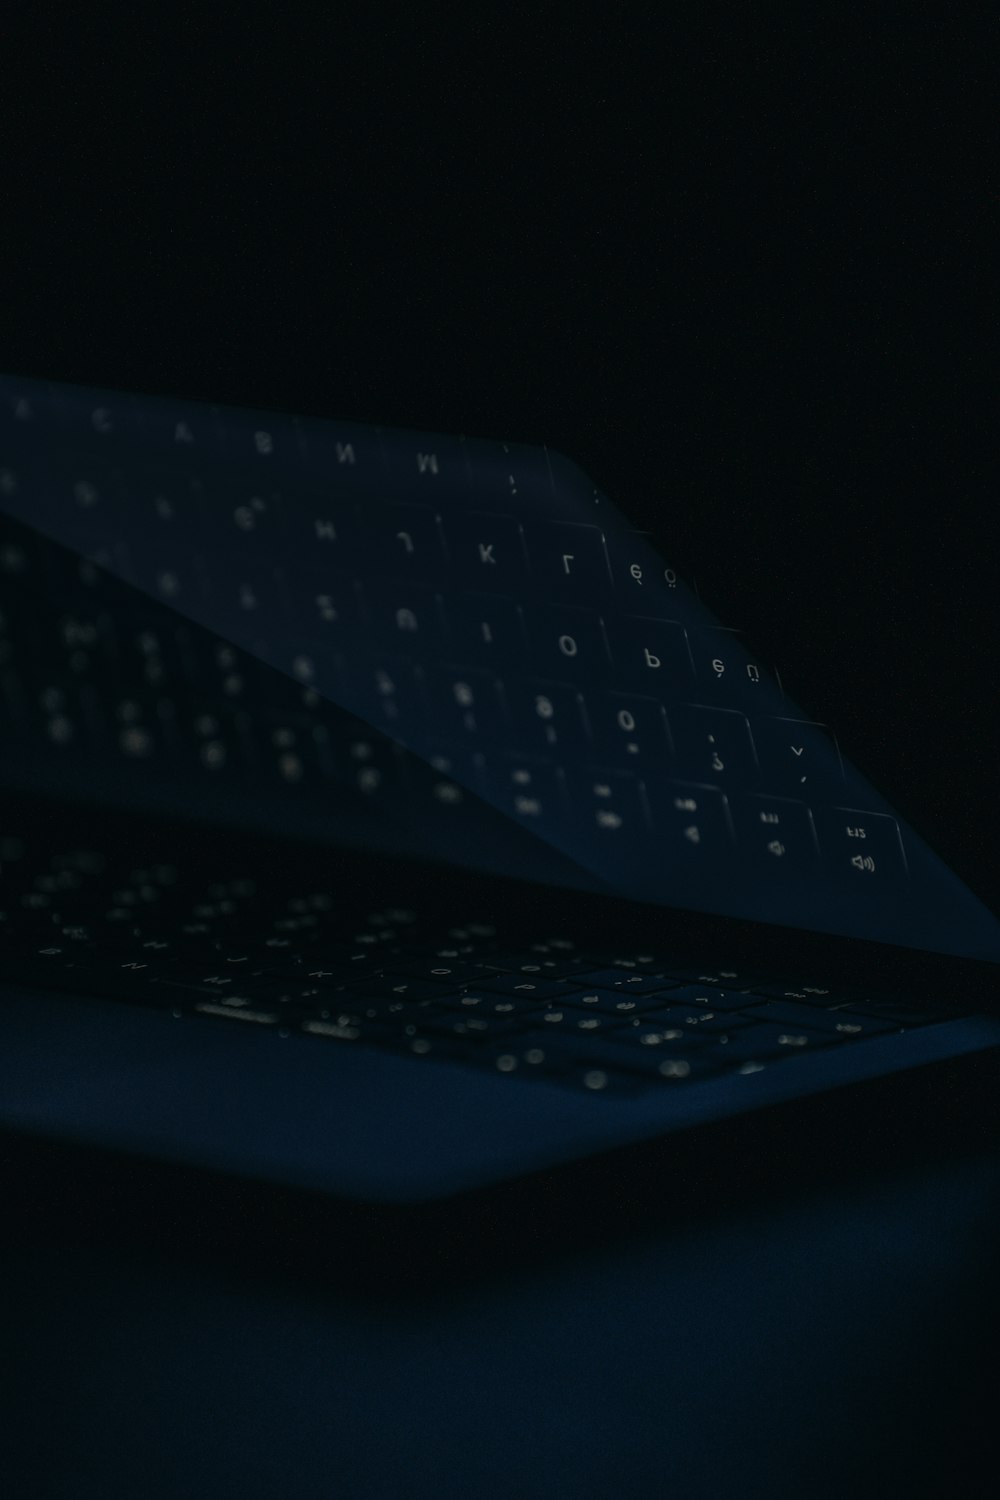 a close up of a computer keyboard in the dark